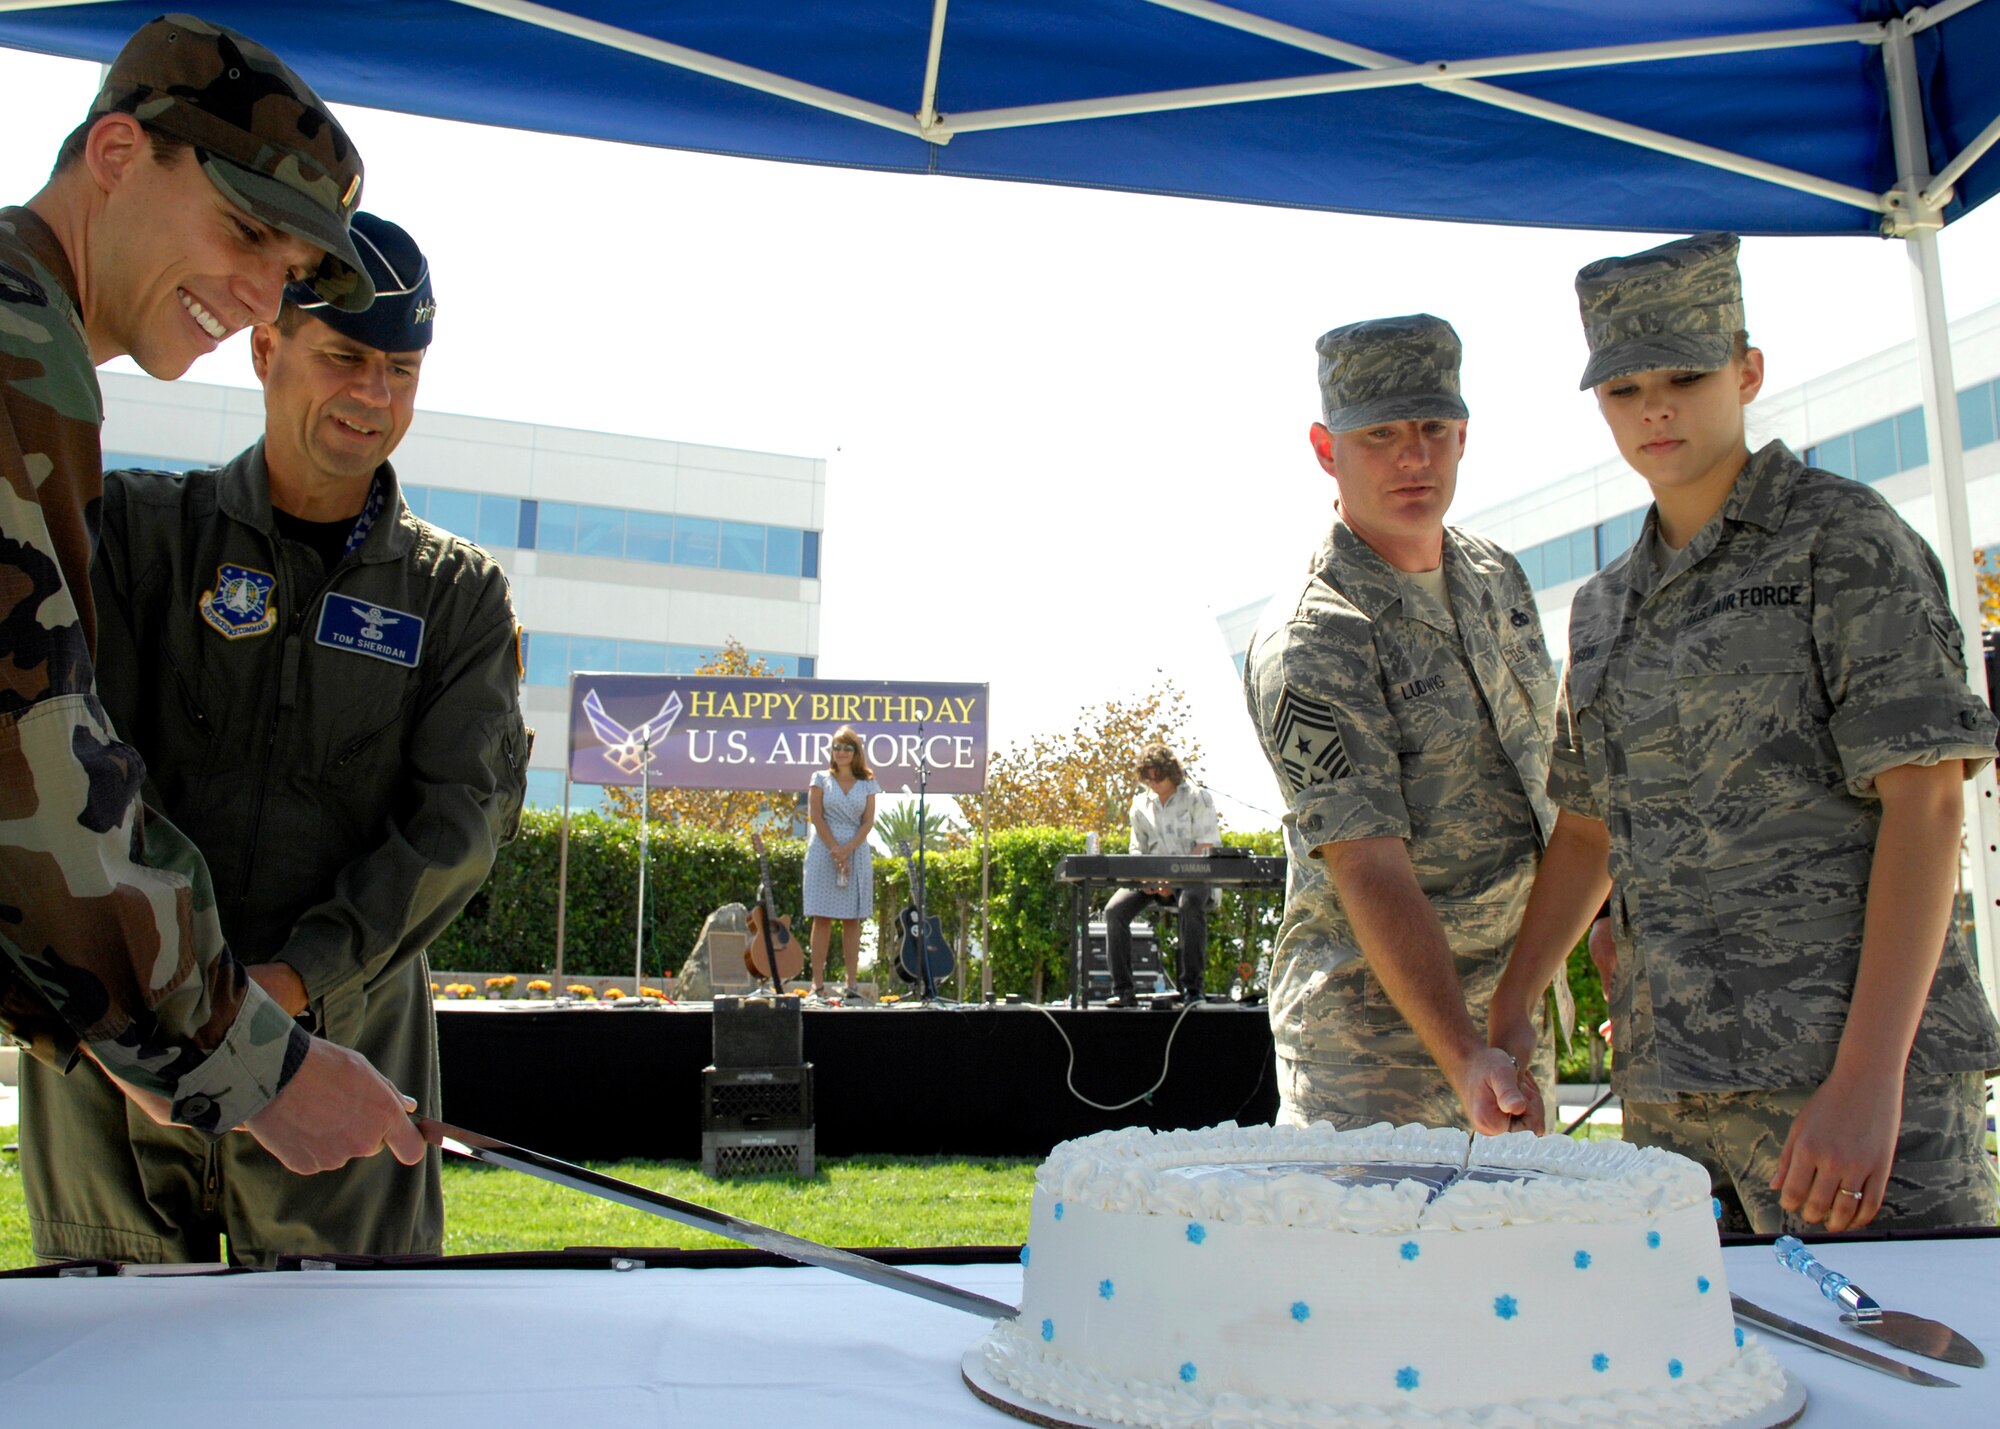 (left to right) The youngest officer on base 2nd Lt Travis Wittick, Space and Missile Systems Center commander Lt. Gen. Tom Scheridan, Command Chief Master Sergeant Chief Stephen Ludwig, and the youngest Airman on base Airman 1st Class Linsy Ellison from the 61st Medical Group, cut the Air Force birthday cake together in the Schriever Space Complex courtyard, Sep. 18. (Photos by Stephen Schester)